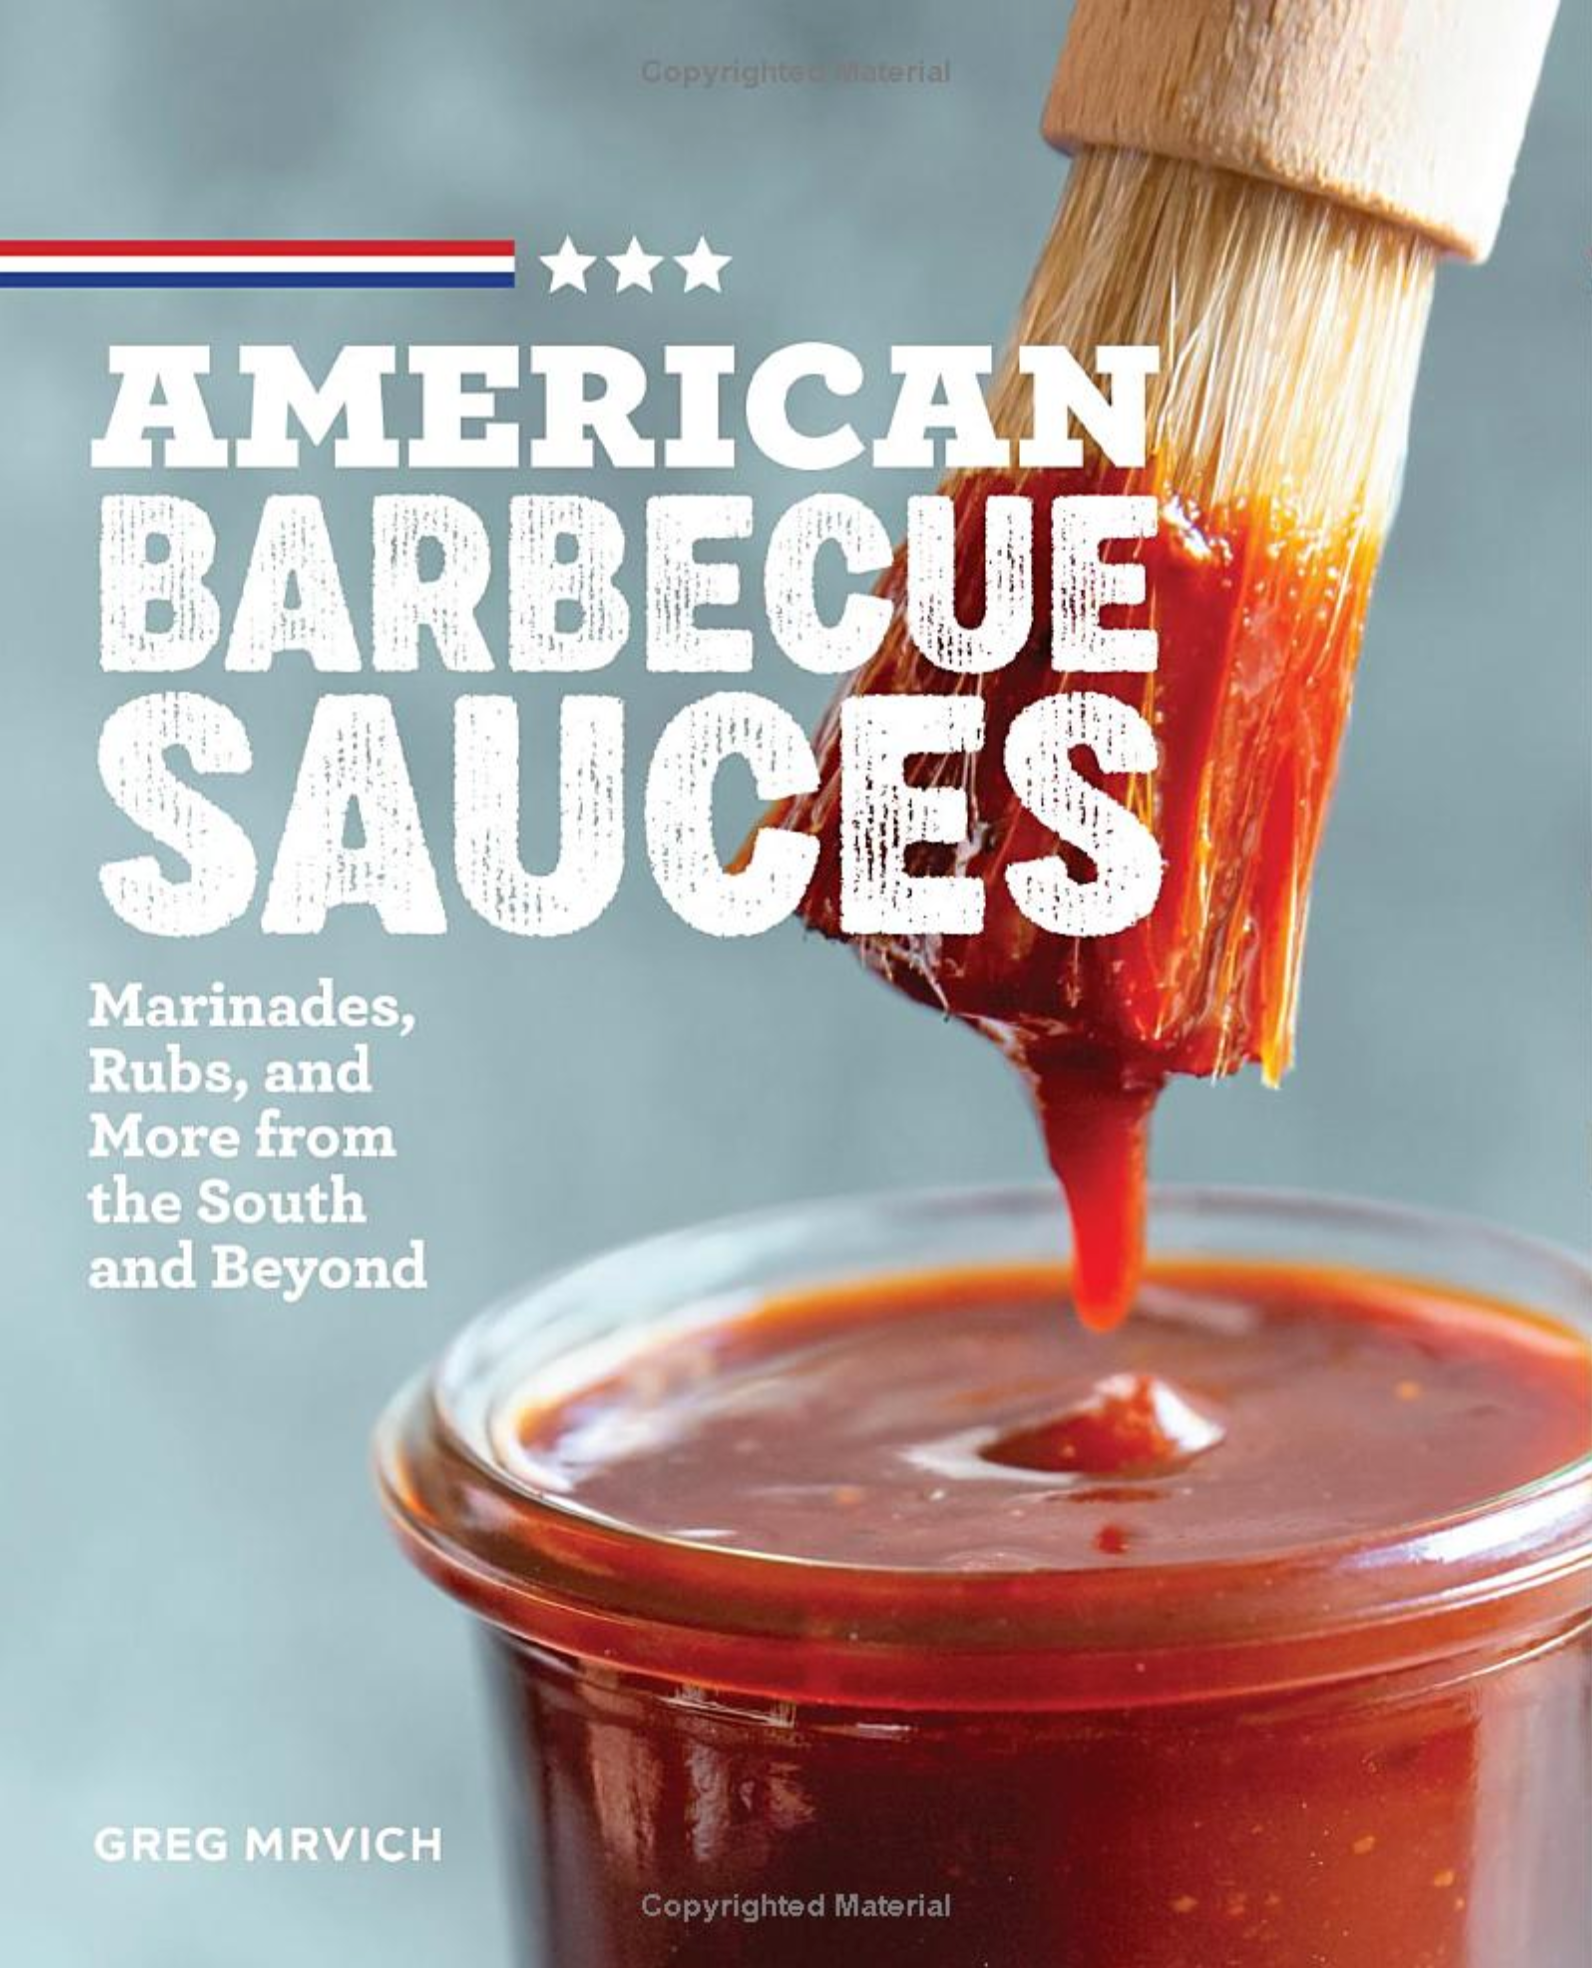 American Barbecue Sauces cookbook cover UMAi Dry